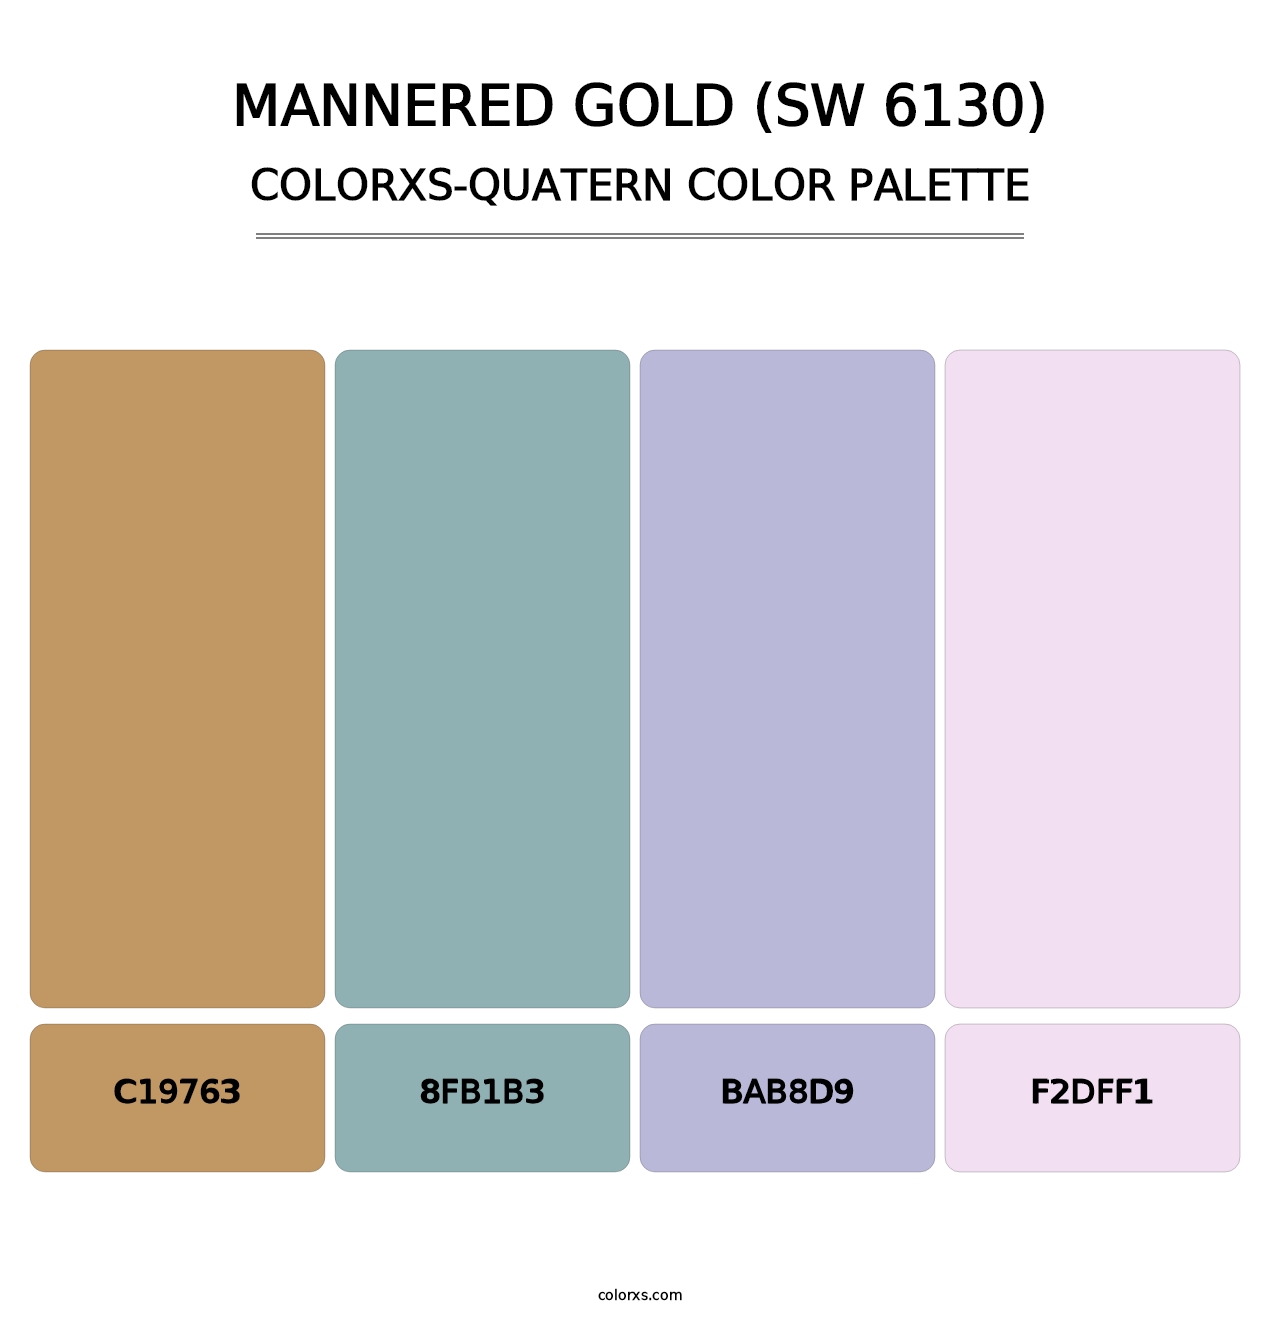 Mannered Gold (SW 6130) - Colorxs Quatern Palette